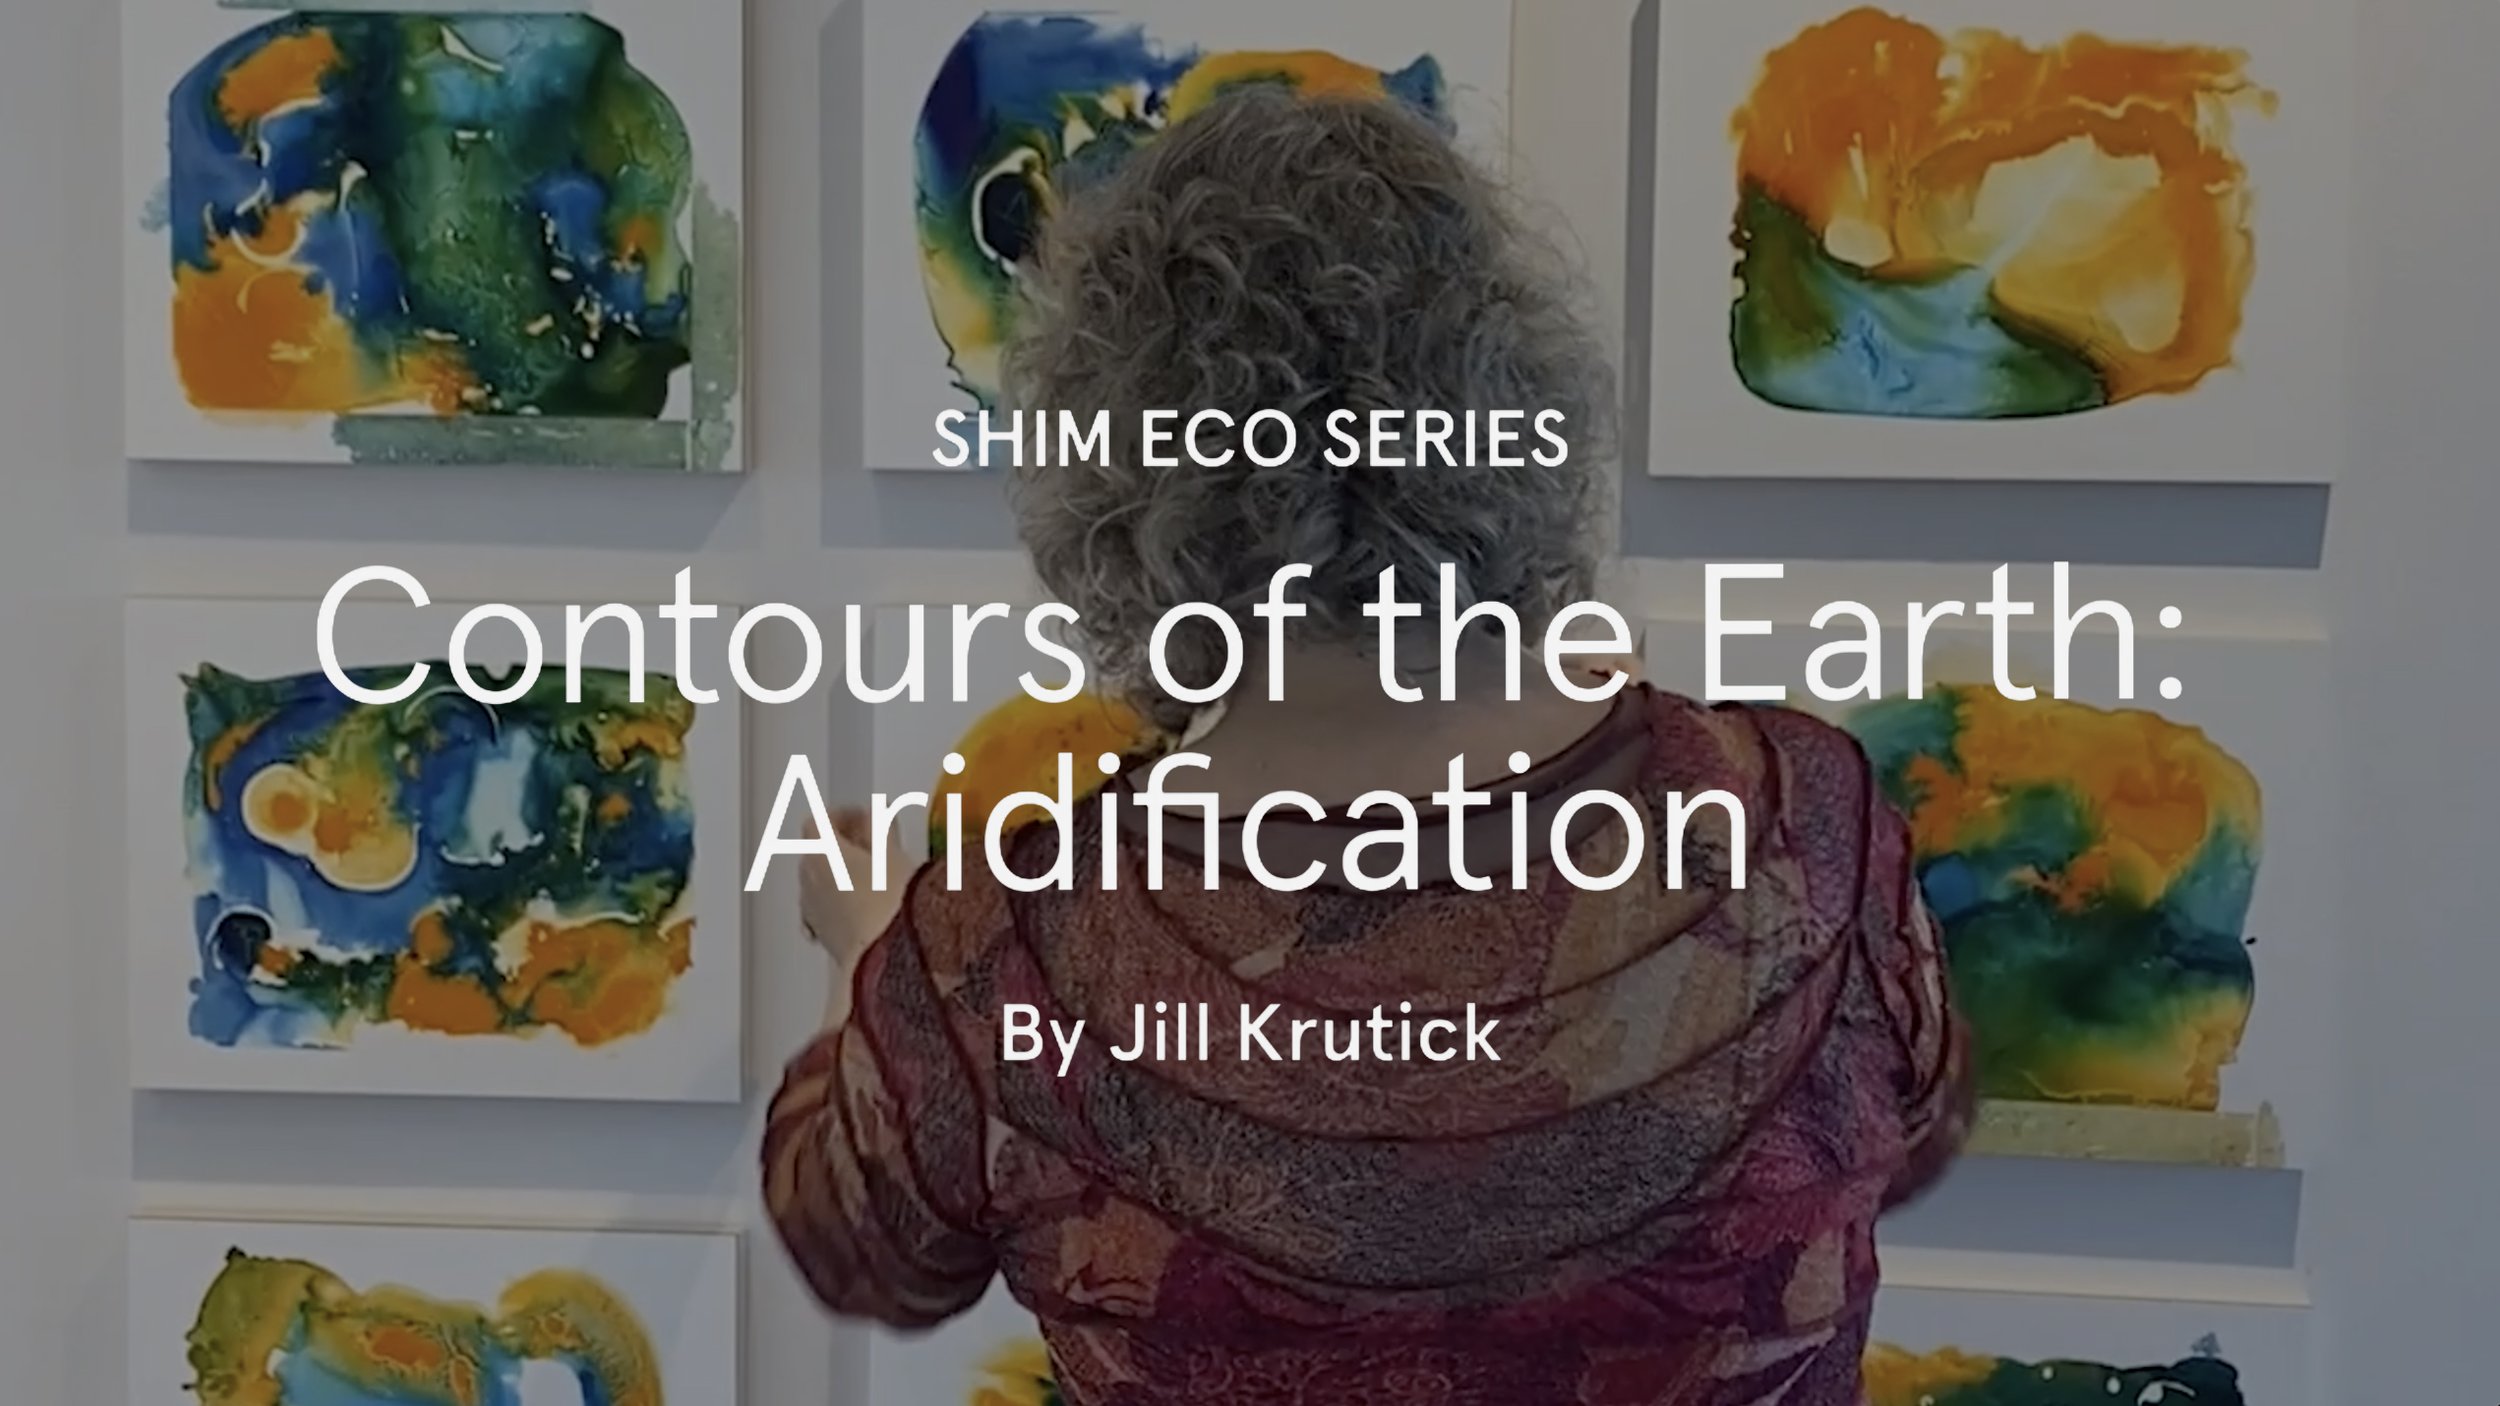 Contours of the Earth: Aridification